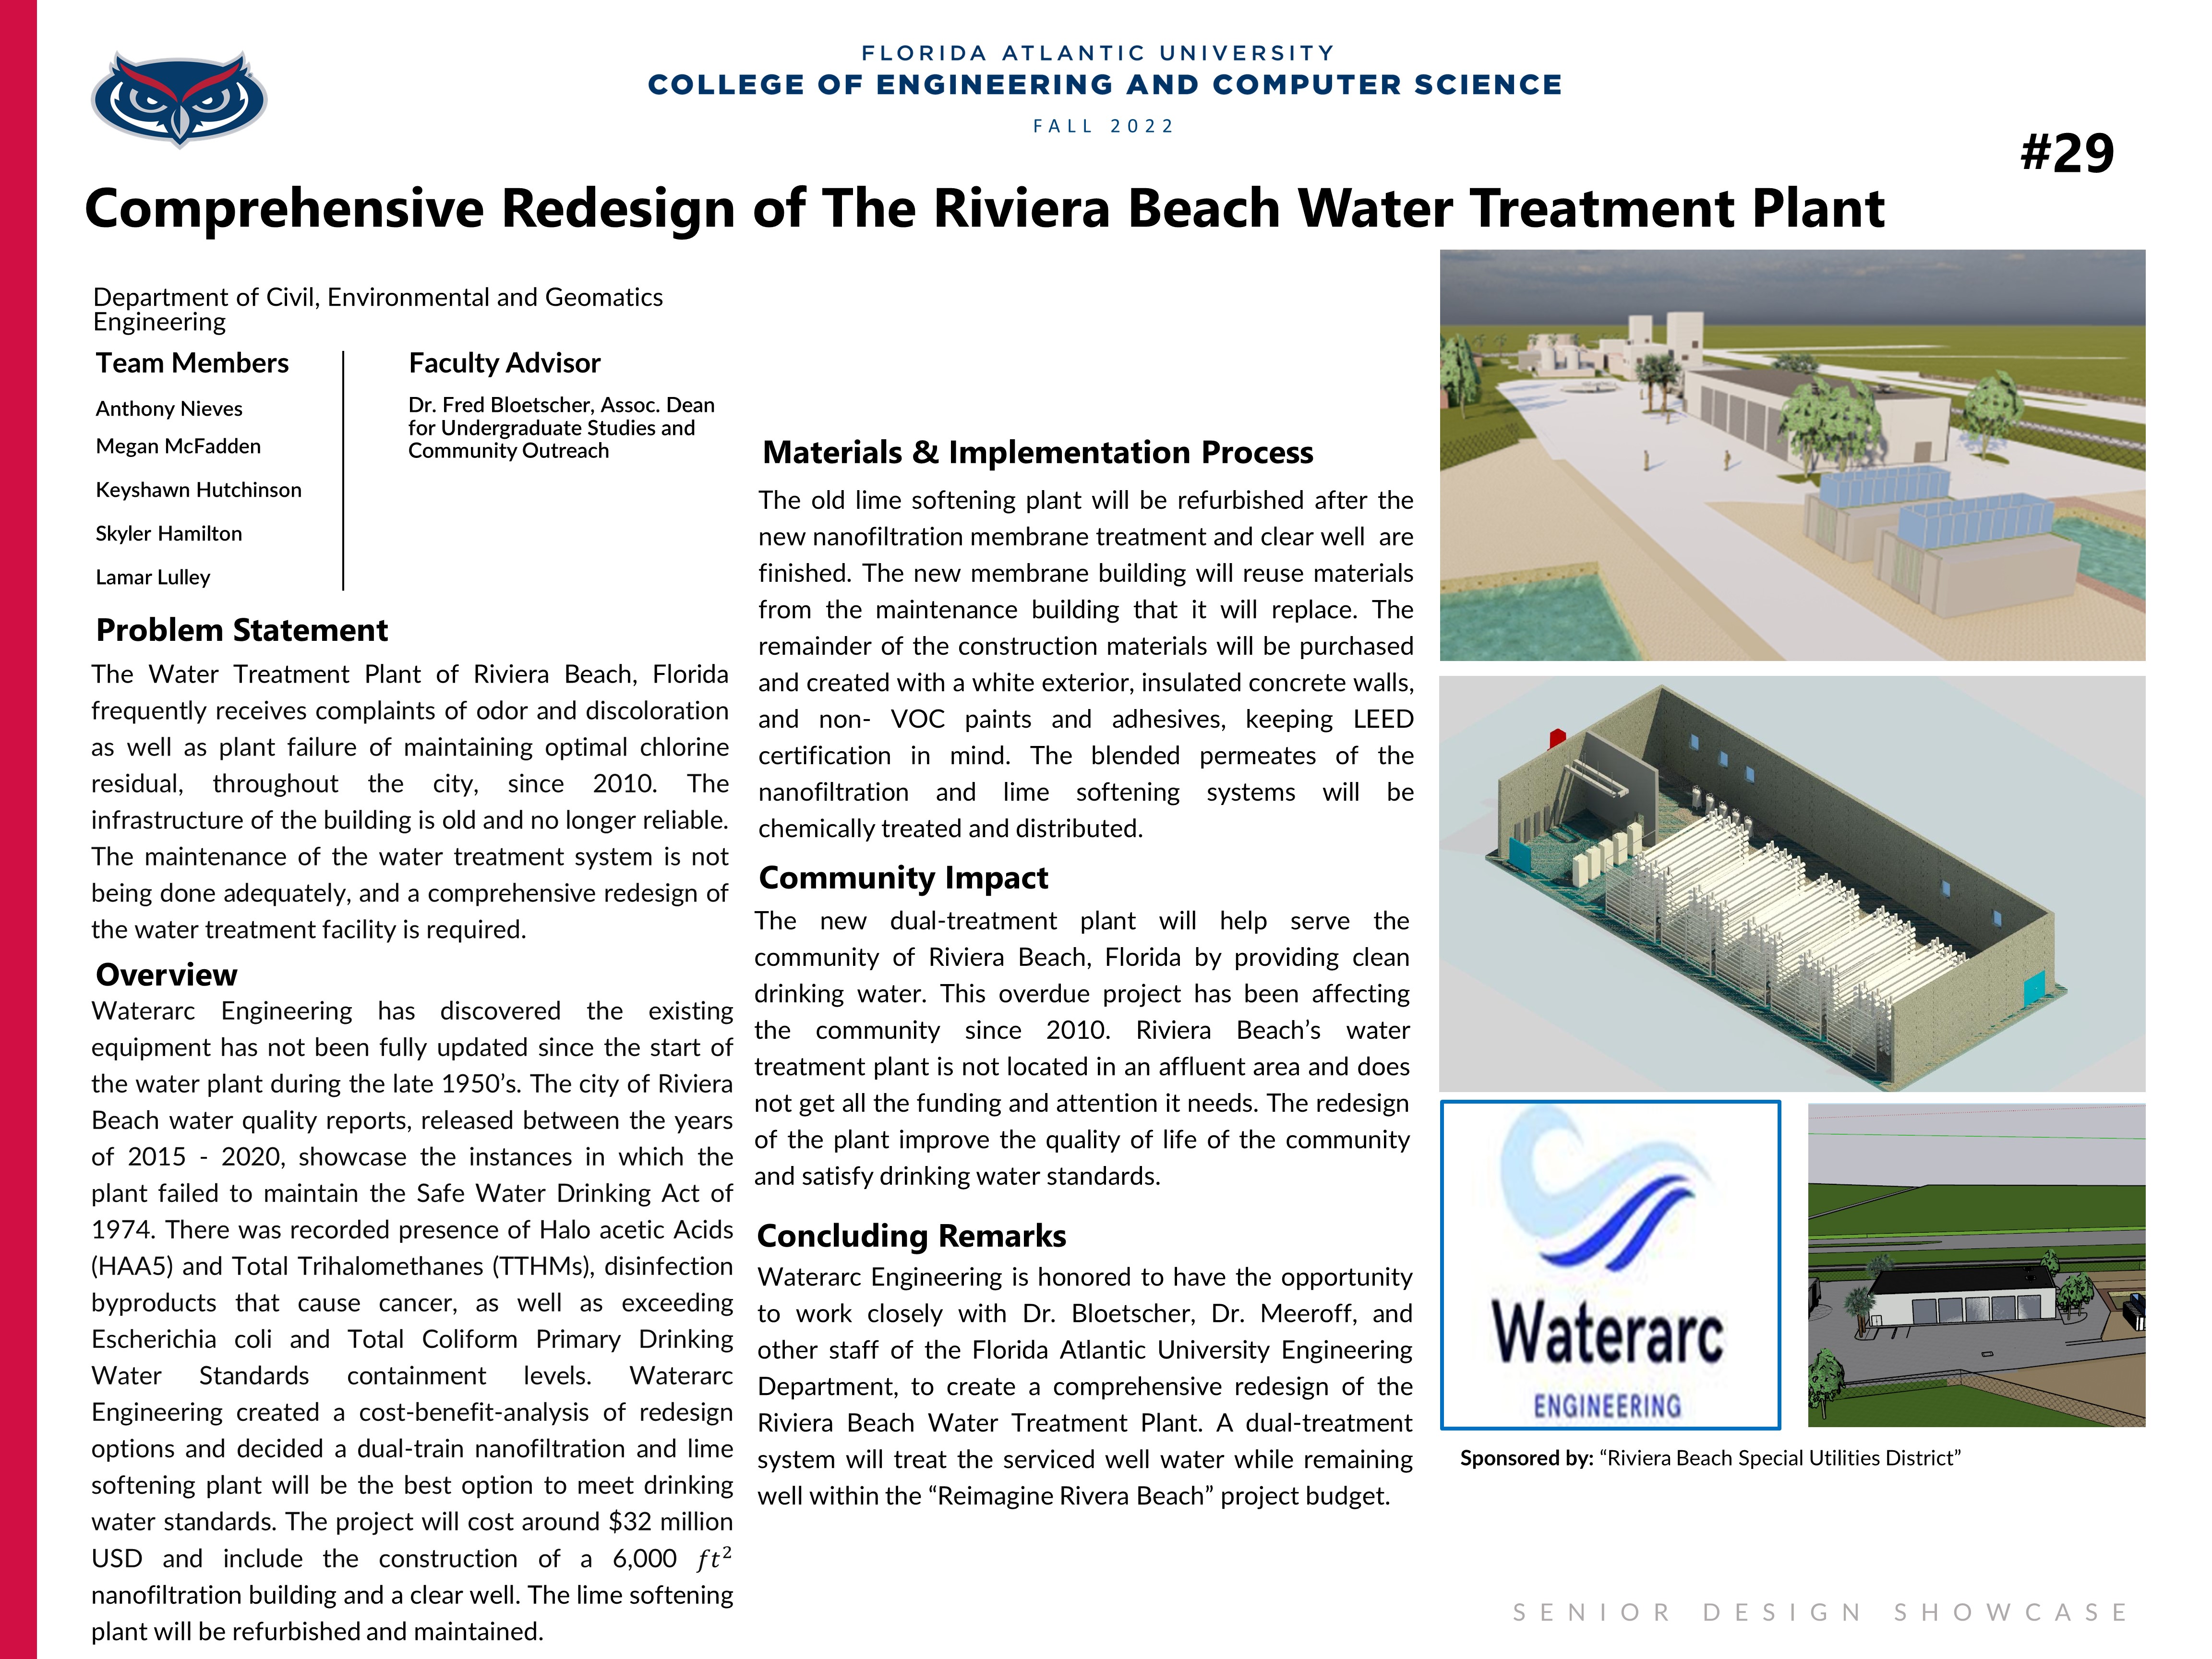 Comprehensive Redesign of the City of Riviera Beach Water Treatment Plant (Waterarc Engineering)